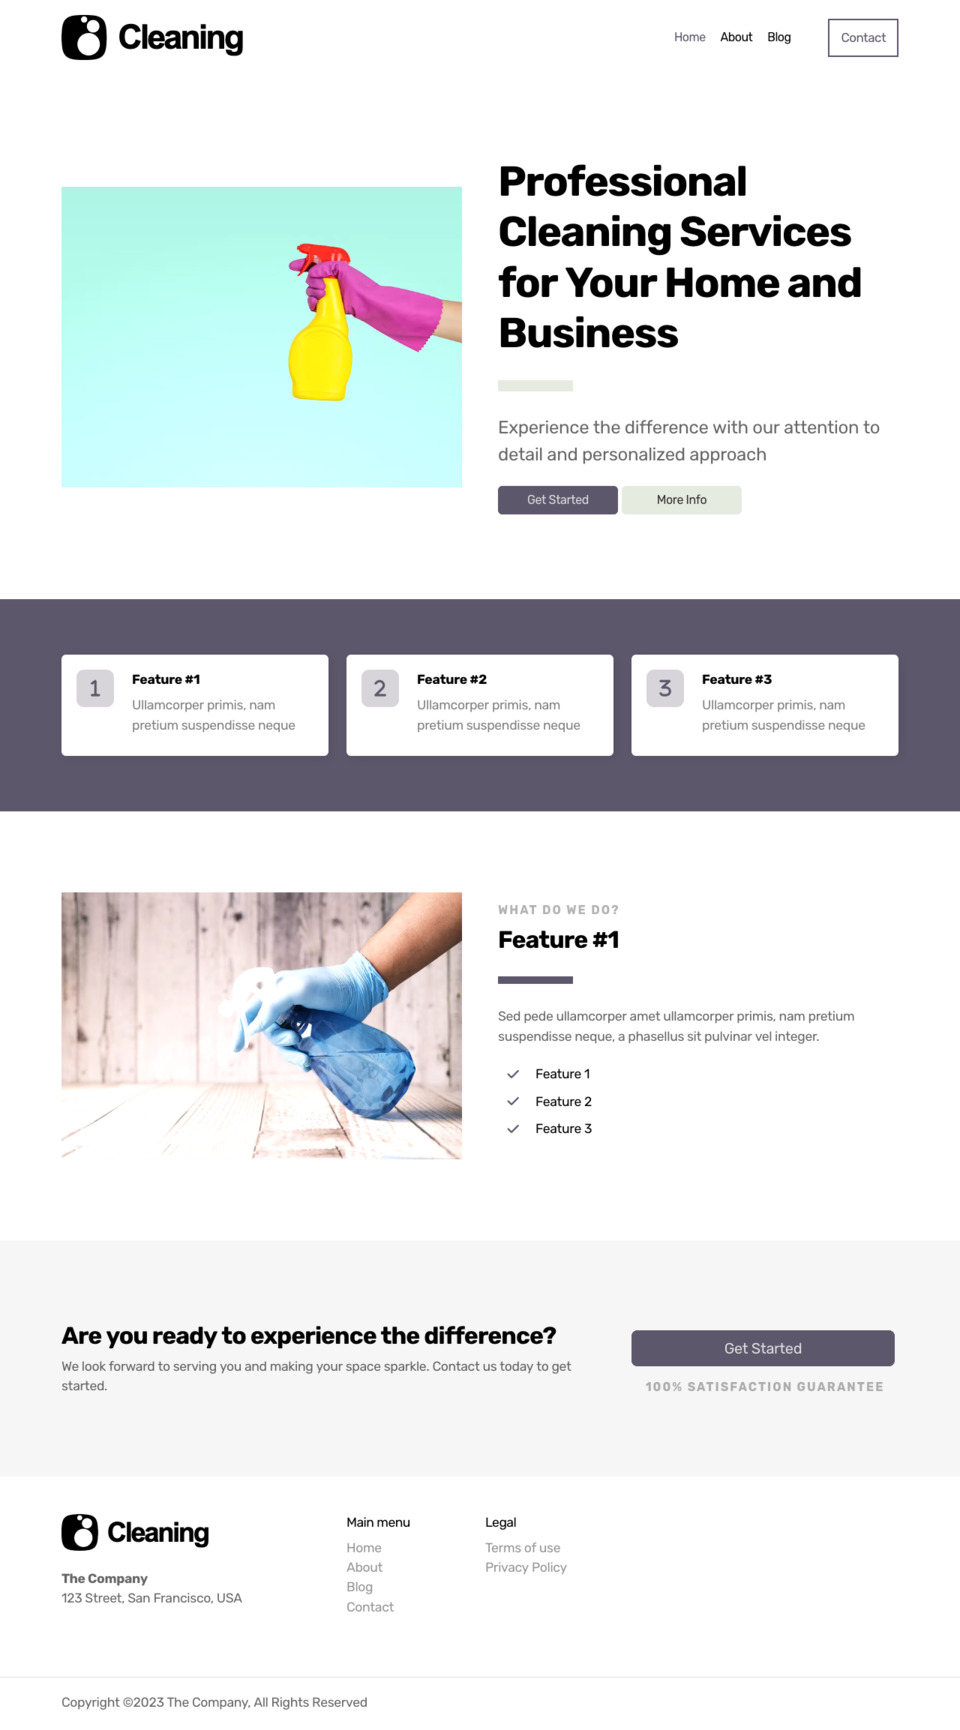 Cleaning Service Website Template - Ideal for cleaning service providers, maid services, and small businesses in the cleaning industry